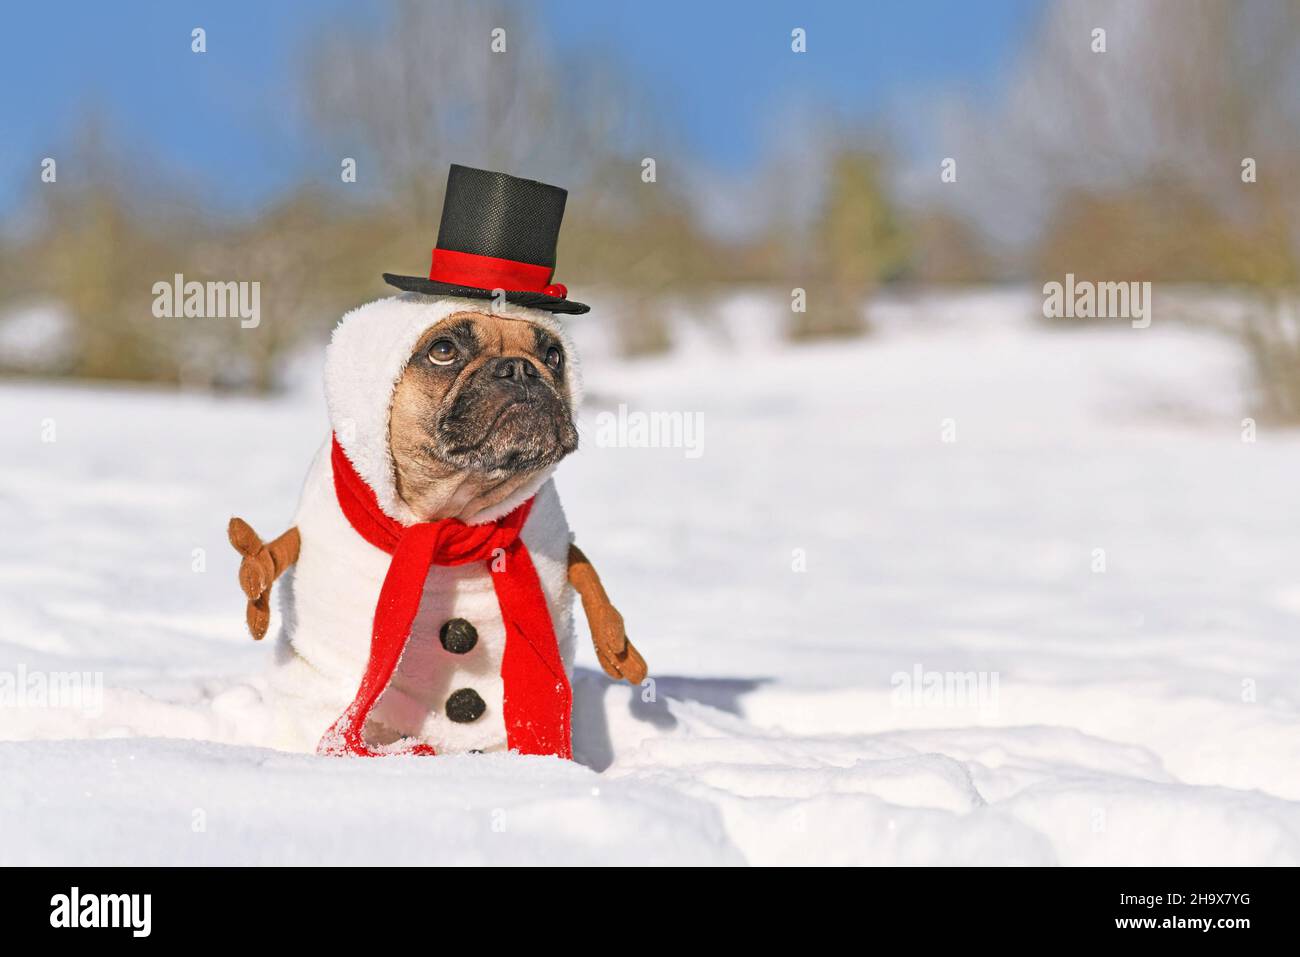 Funny snowman dog. French Bulldog dressed up with Christmas costume with red scarf, fake stick arms and top hat in winter snow landscape Stock Photo